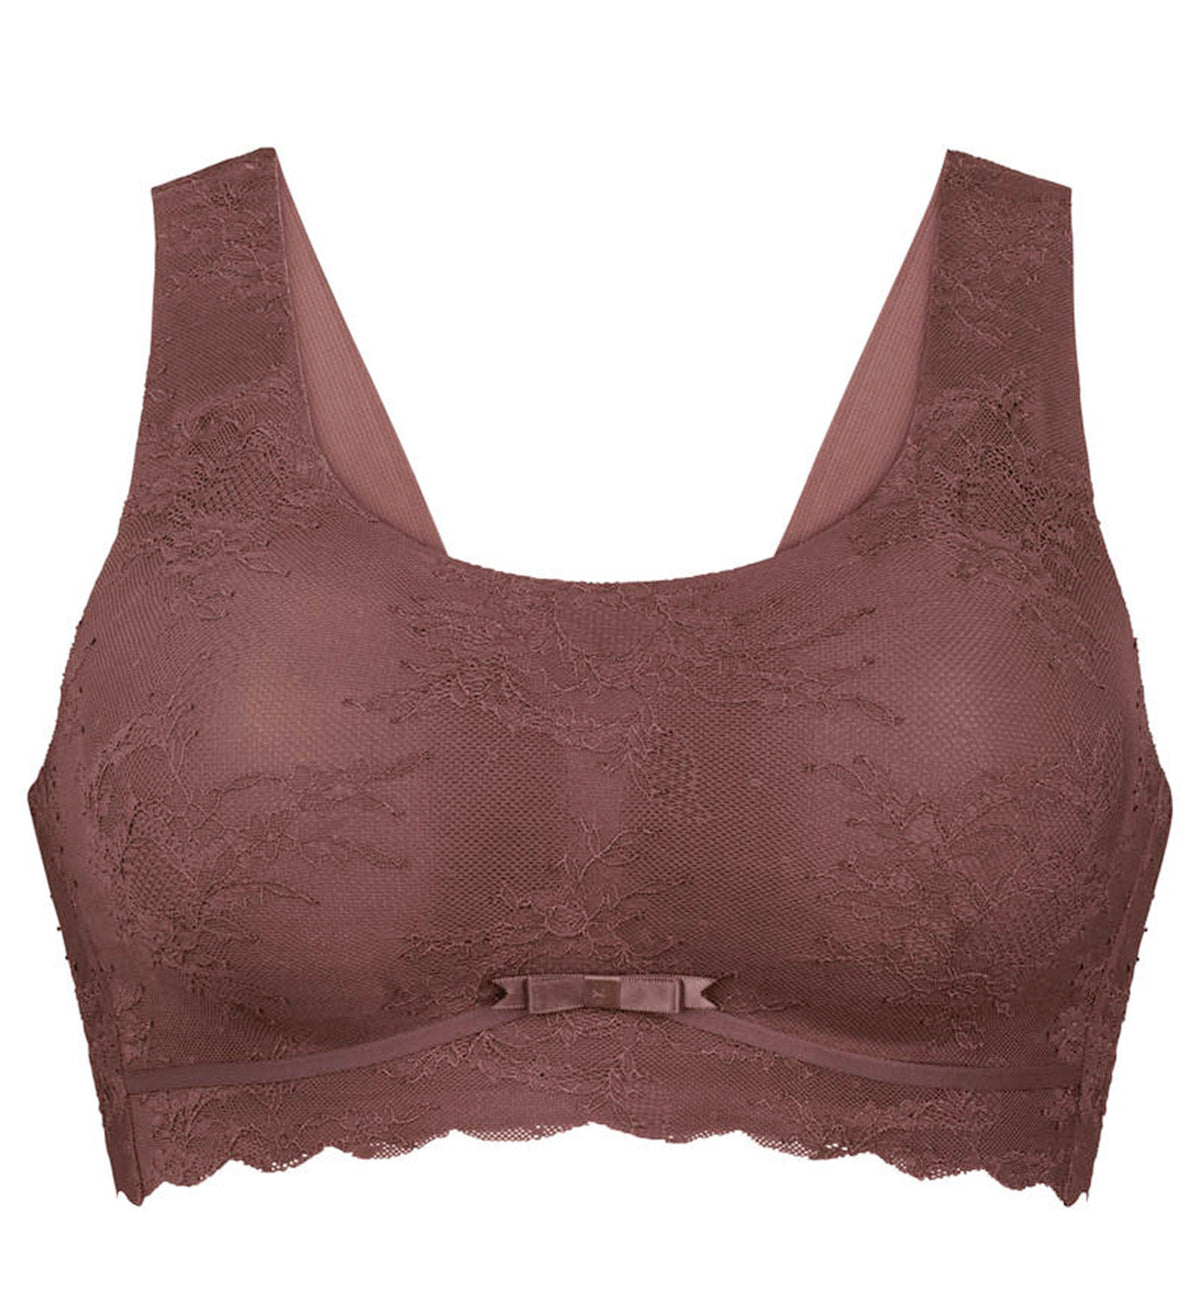 Anita Essentials Lace Lightly Padded Bralette (5400),XS,Berry - Berry,XS